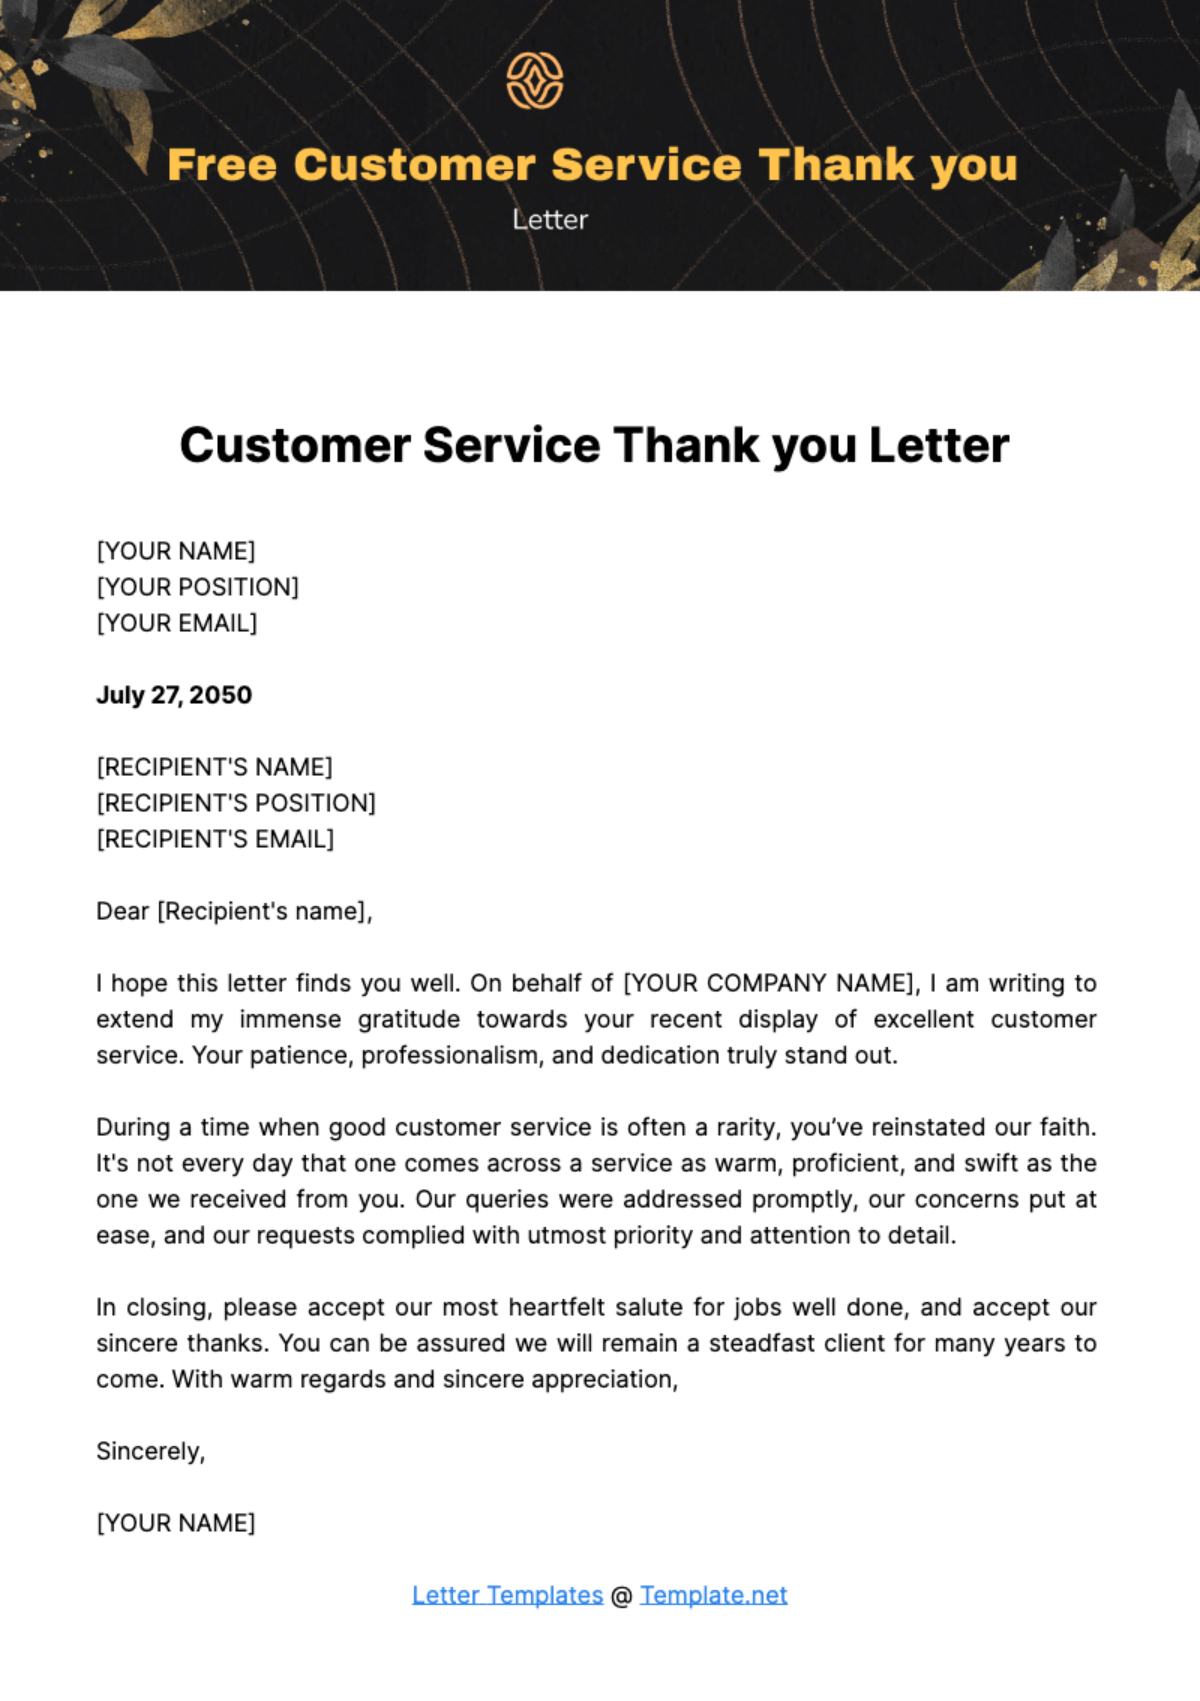 Free Customer Service Thank you Letter Template